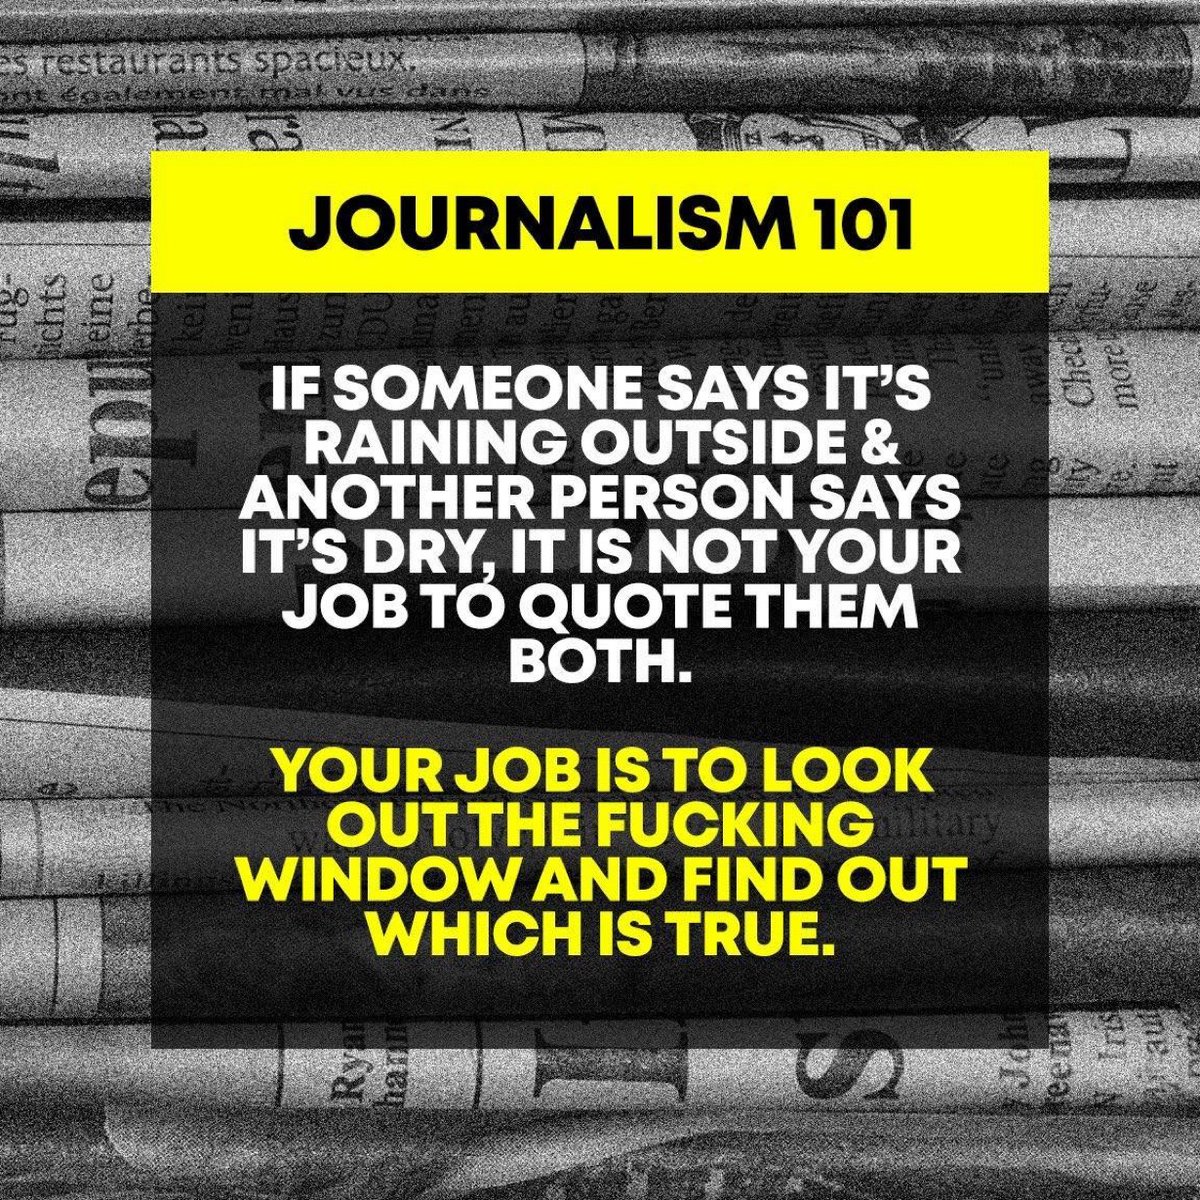 There is always some inherent bias in journalists because they're human But there is a huge difference between those who do the bidding of their GOP billionaire owners & reporting the facts & truth They're #GOPLapdogs & we see them daily refusing to call out Trump & GOP LIES